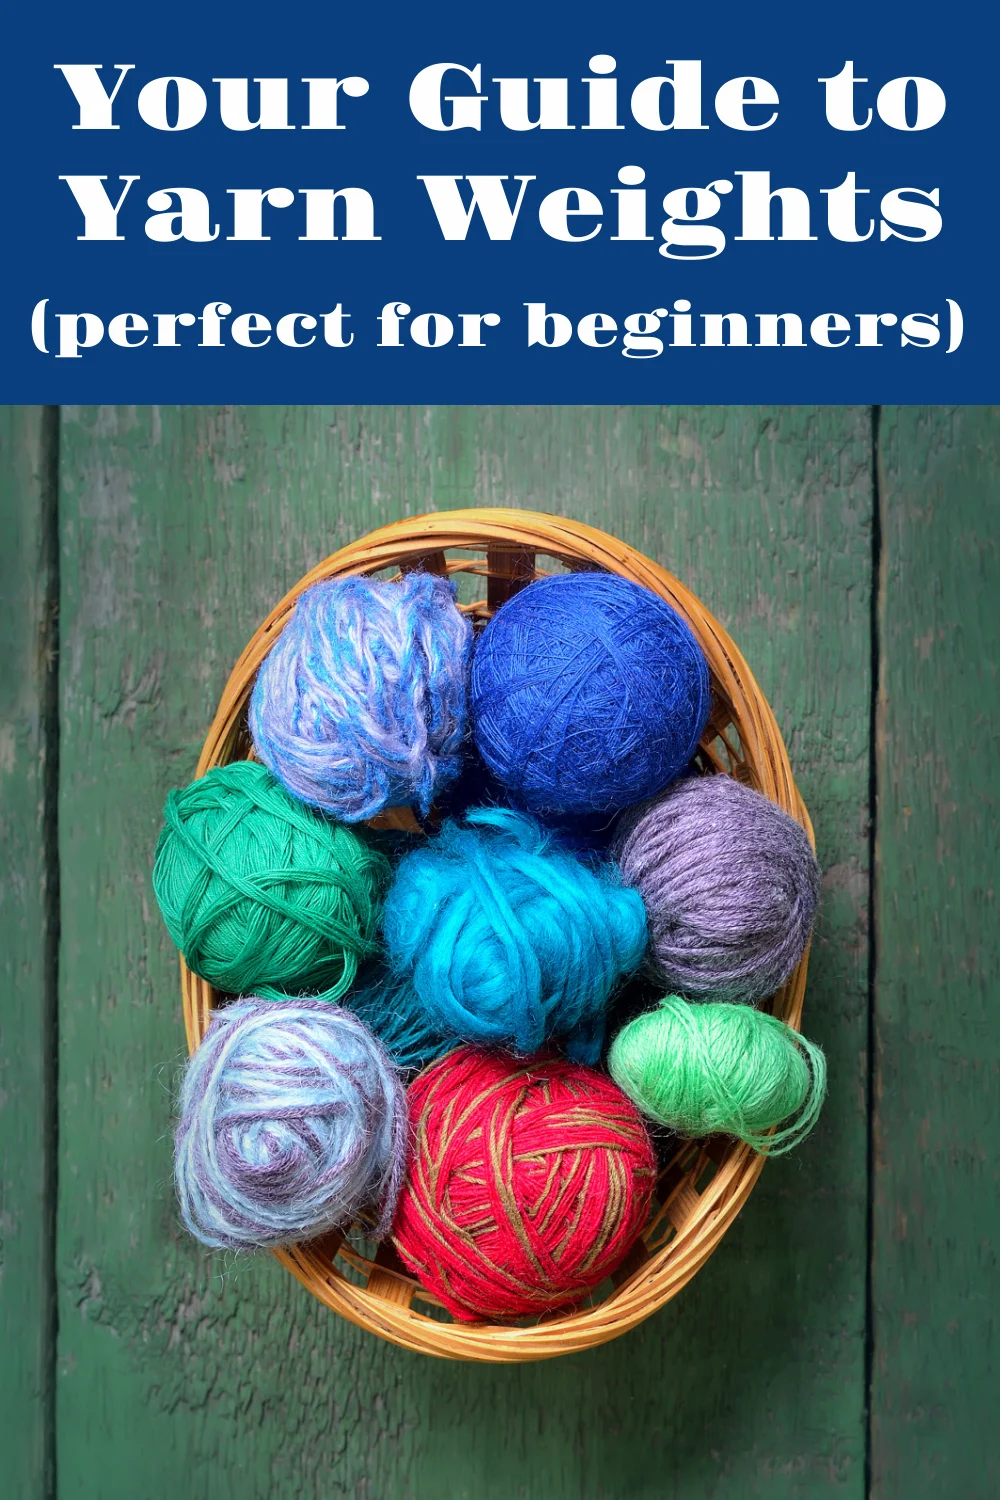 Acrylic Yarn: The Ultimate Guide for Crafters, Knitters & More